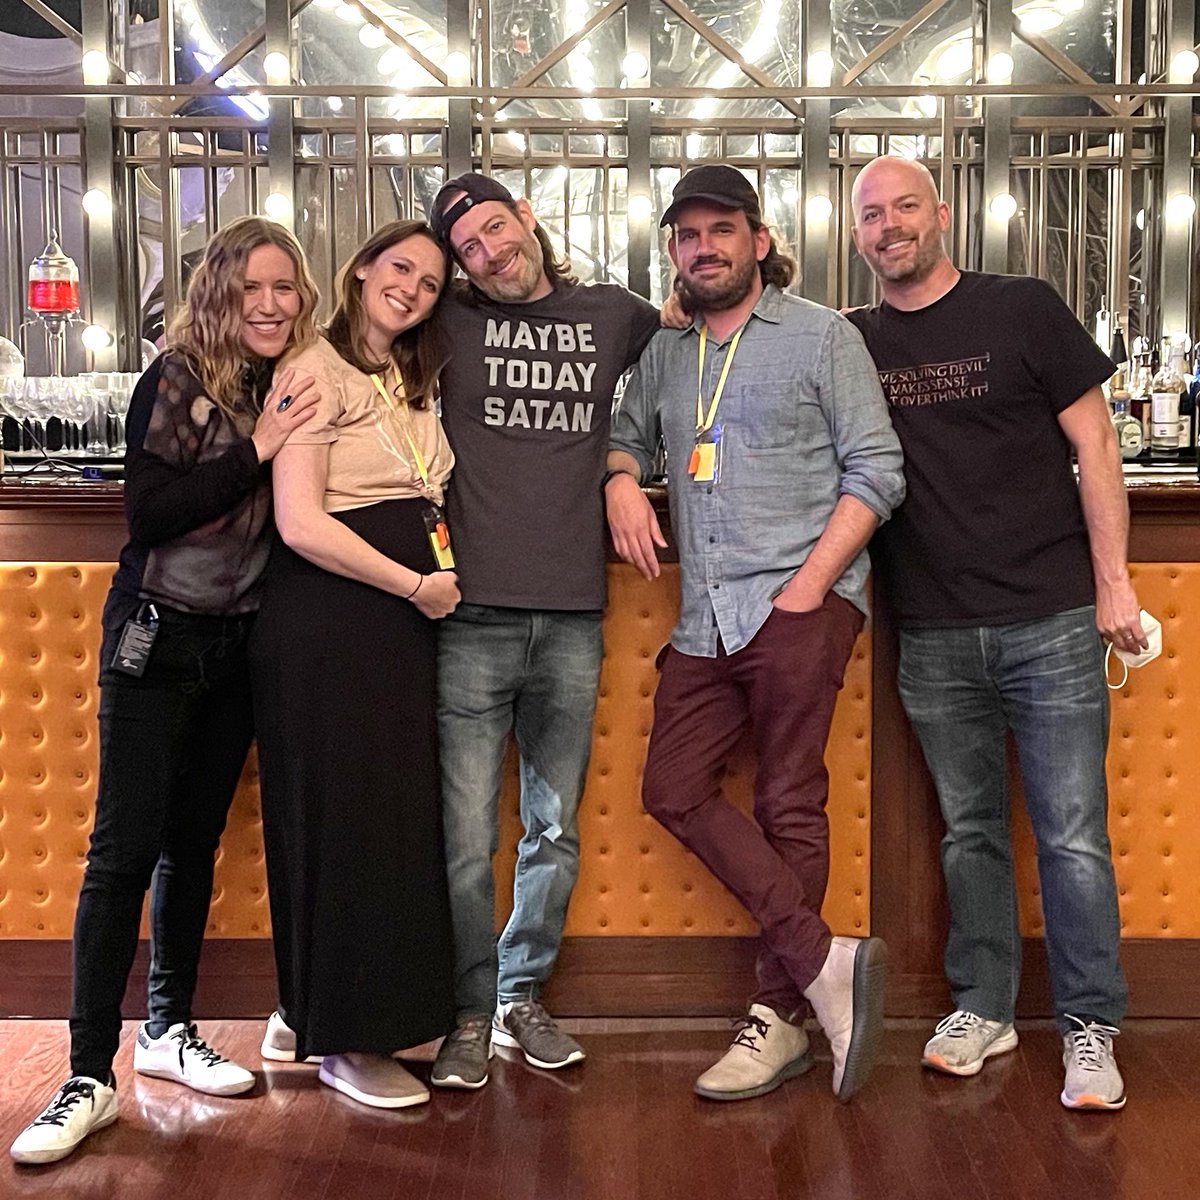 On the final day of shooting, these 5 #Lucifer writers spent the entire day together on set. The same 5 writers who have worked on the show since the beginning. To Ildy, Jen, Mike & Joe — thank you for these incredible 6 years together. They've been life-changing ❤️ #family